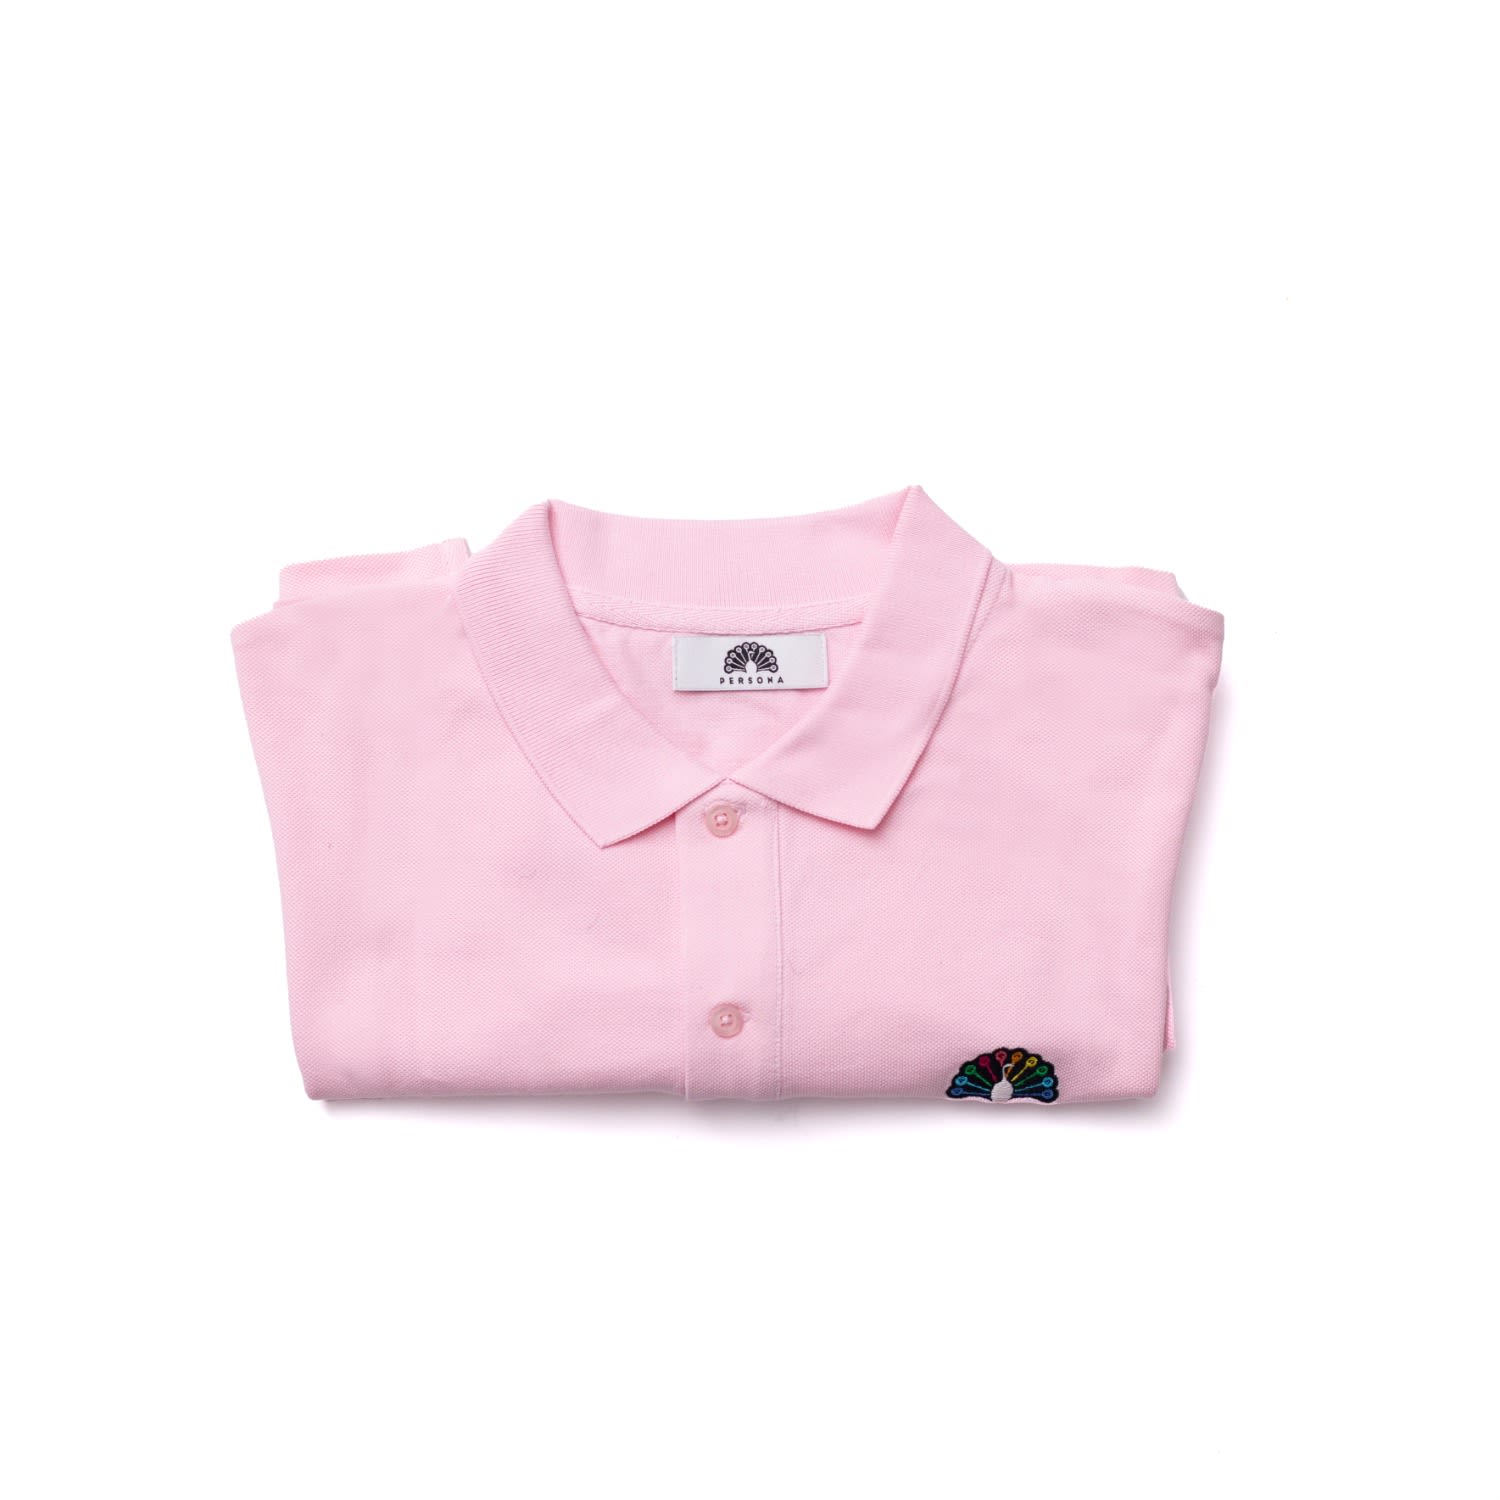 Pink / Purple Pink Pique Cotton Polo T-Shirt For Men Small Persona